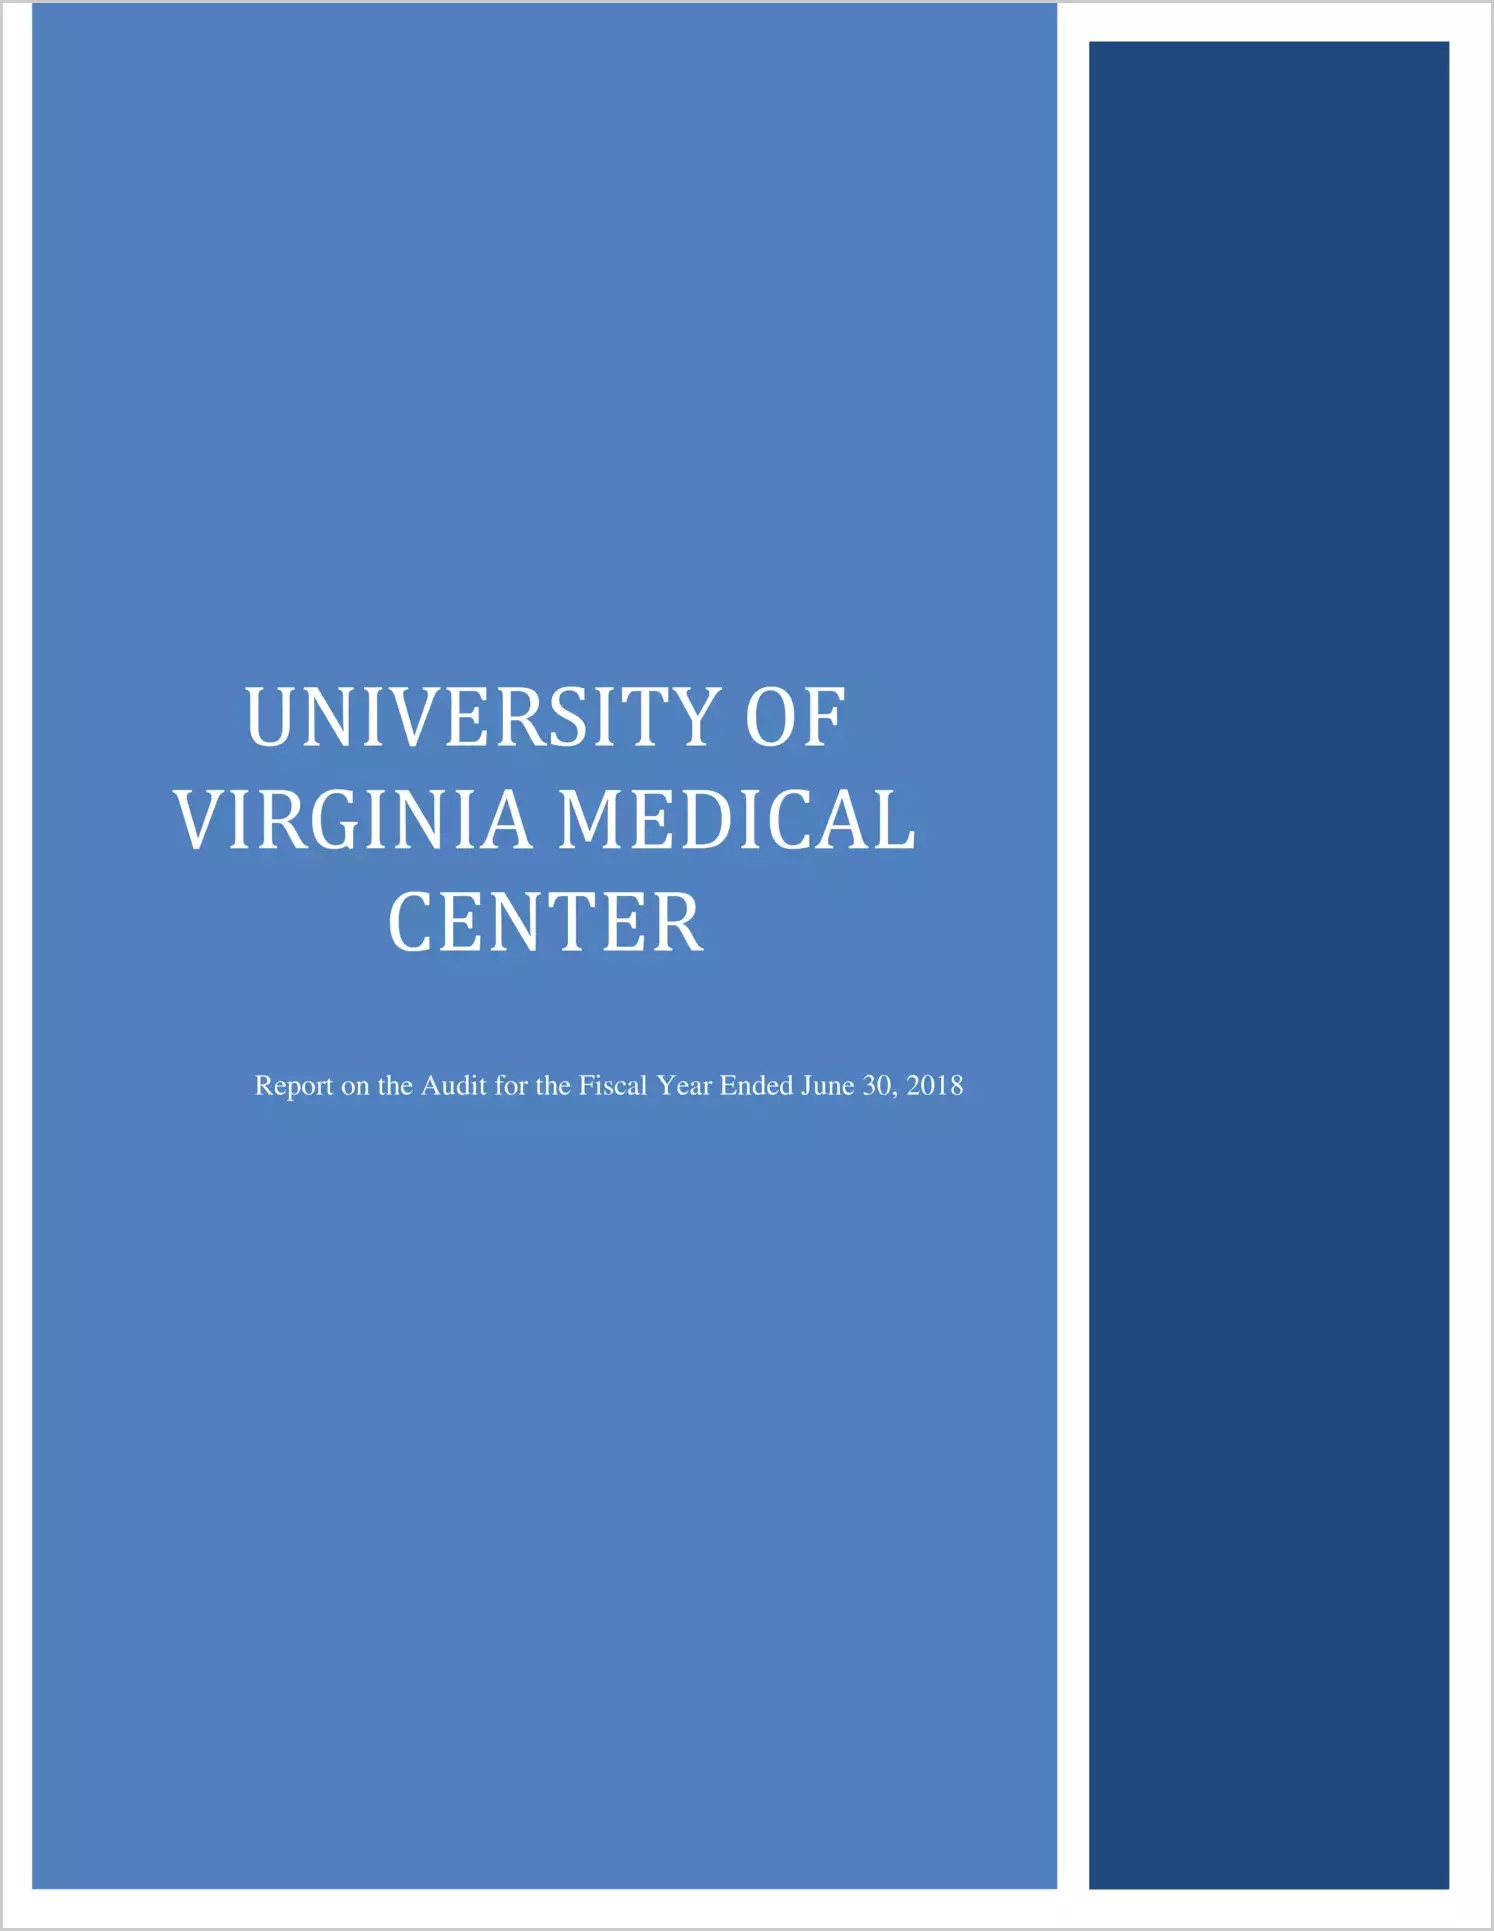 University of Virginia Medical Center Financial Statement for the year ended June 30, 2018